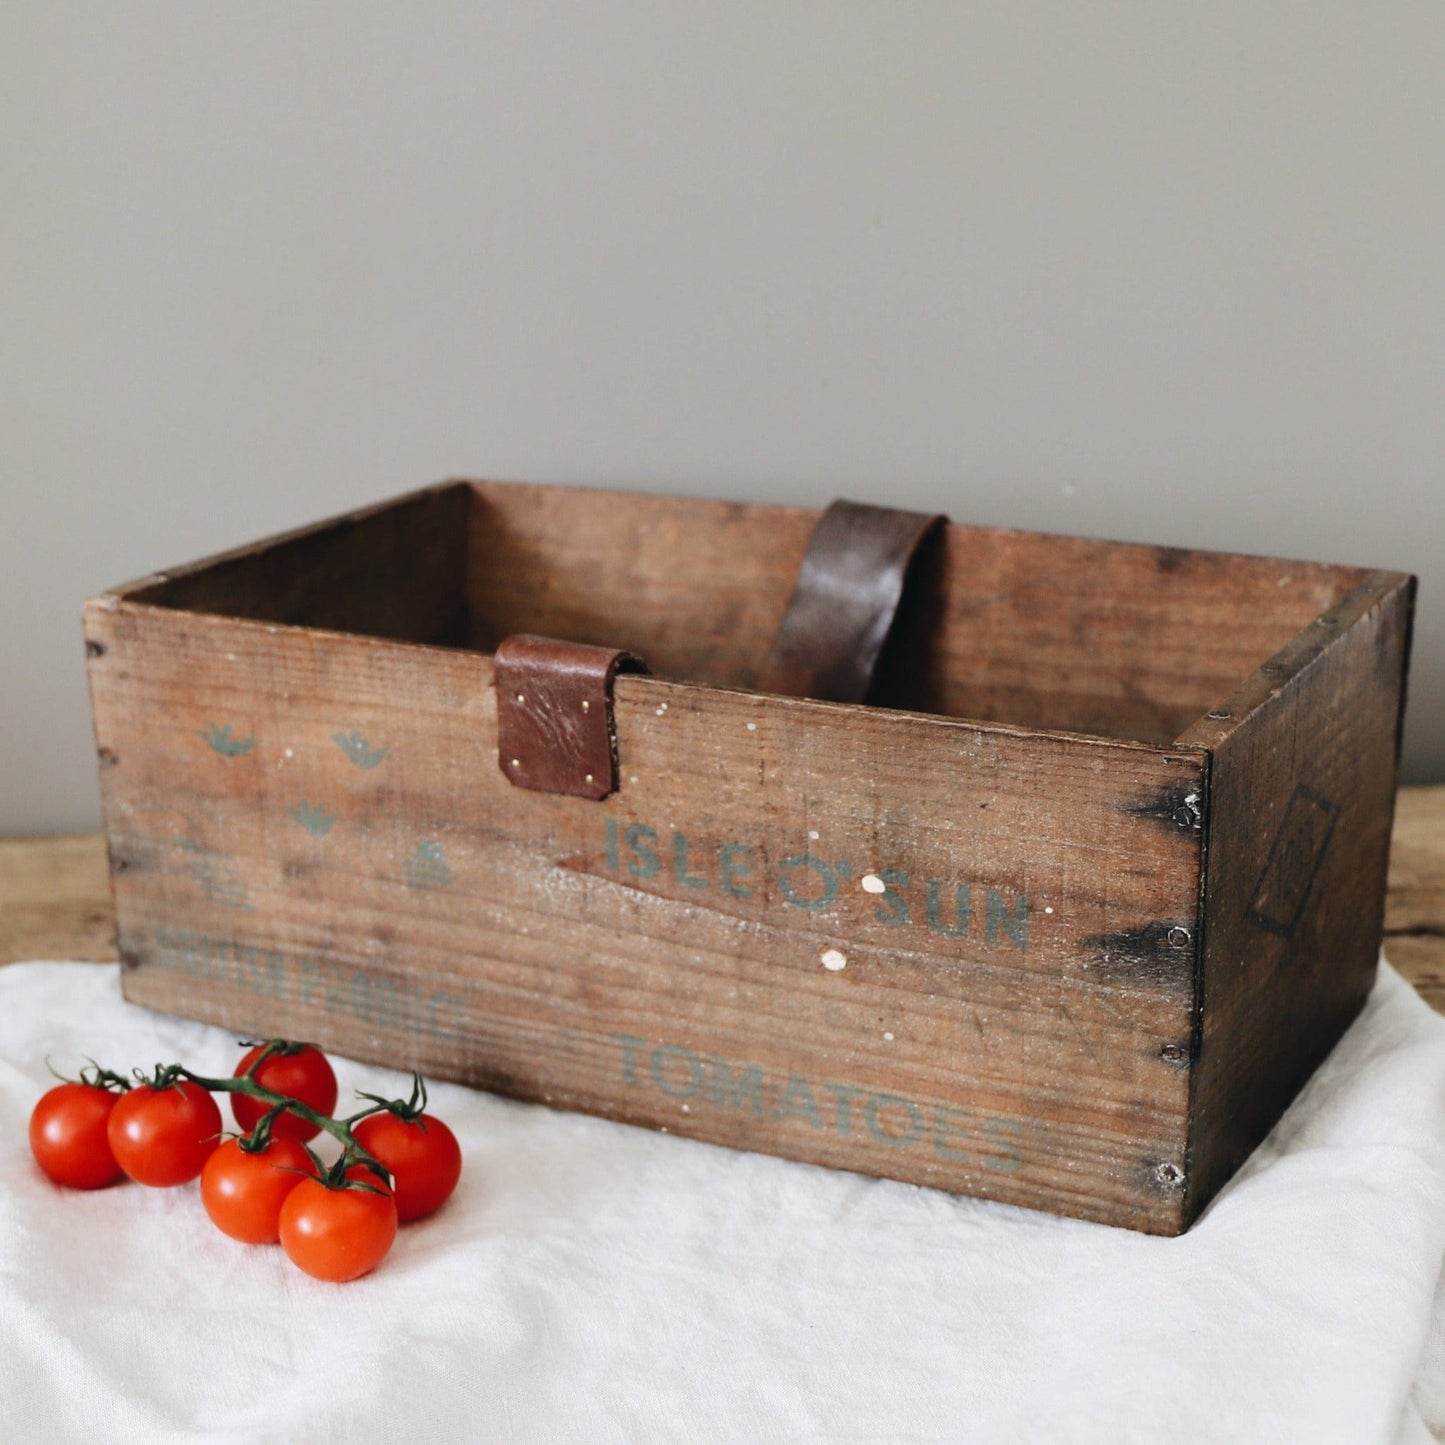 Other Baskets & Hampers Guernsey Chip Basket for Tomatoes - 1953-61 18589